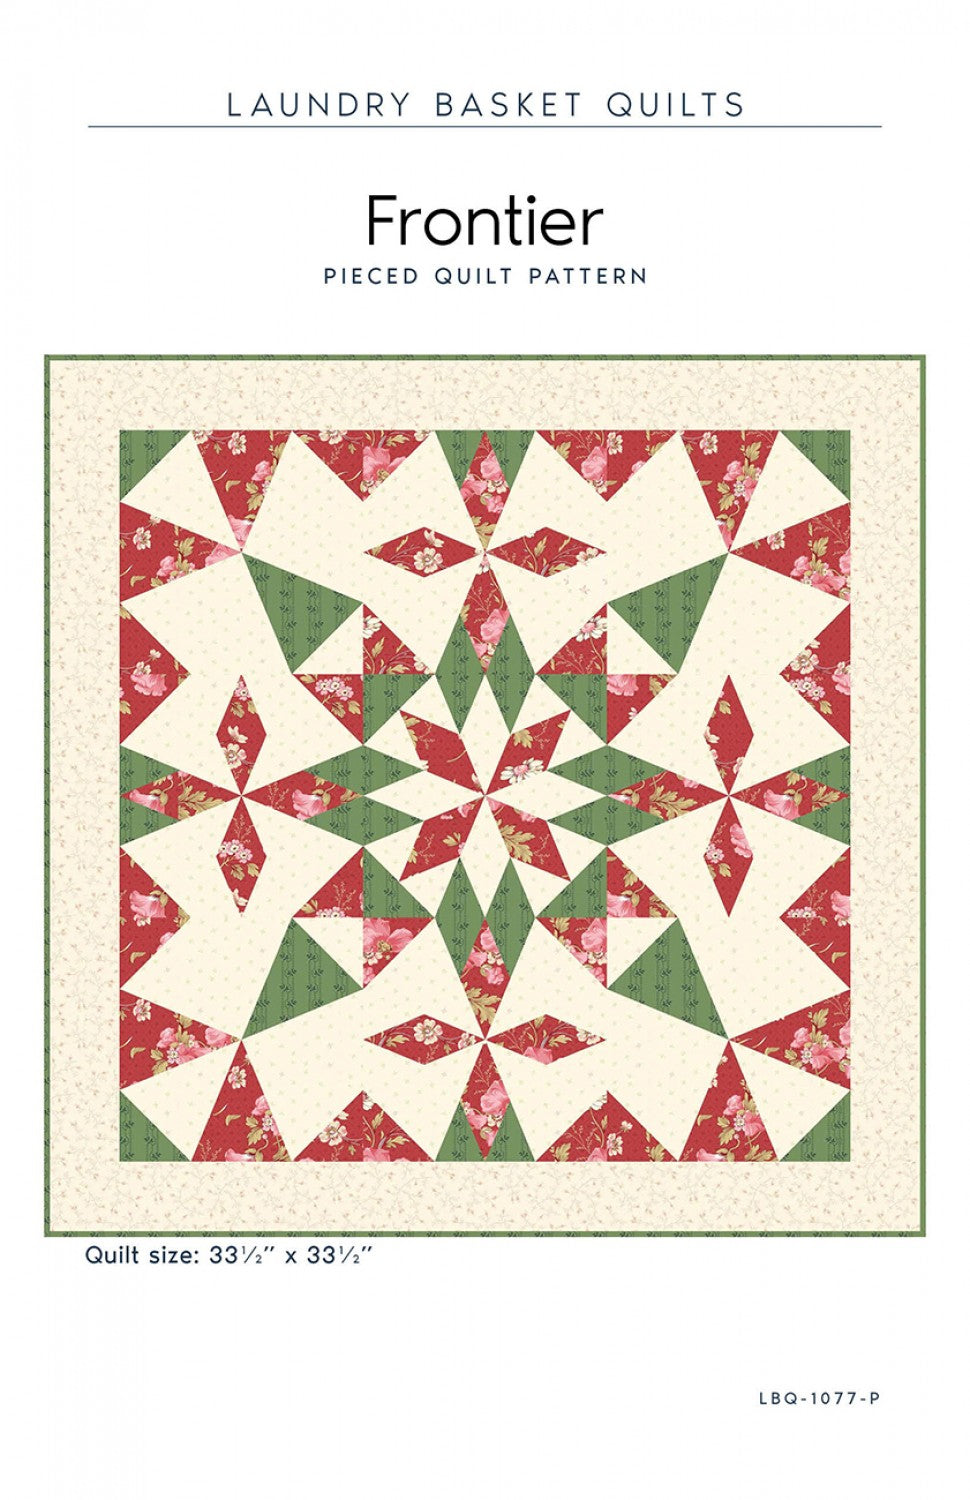 Frontier Quilt Pattern by Edyta Sitar of Laundry Basket Quilts